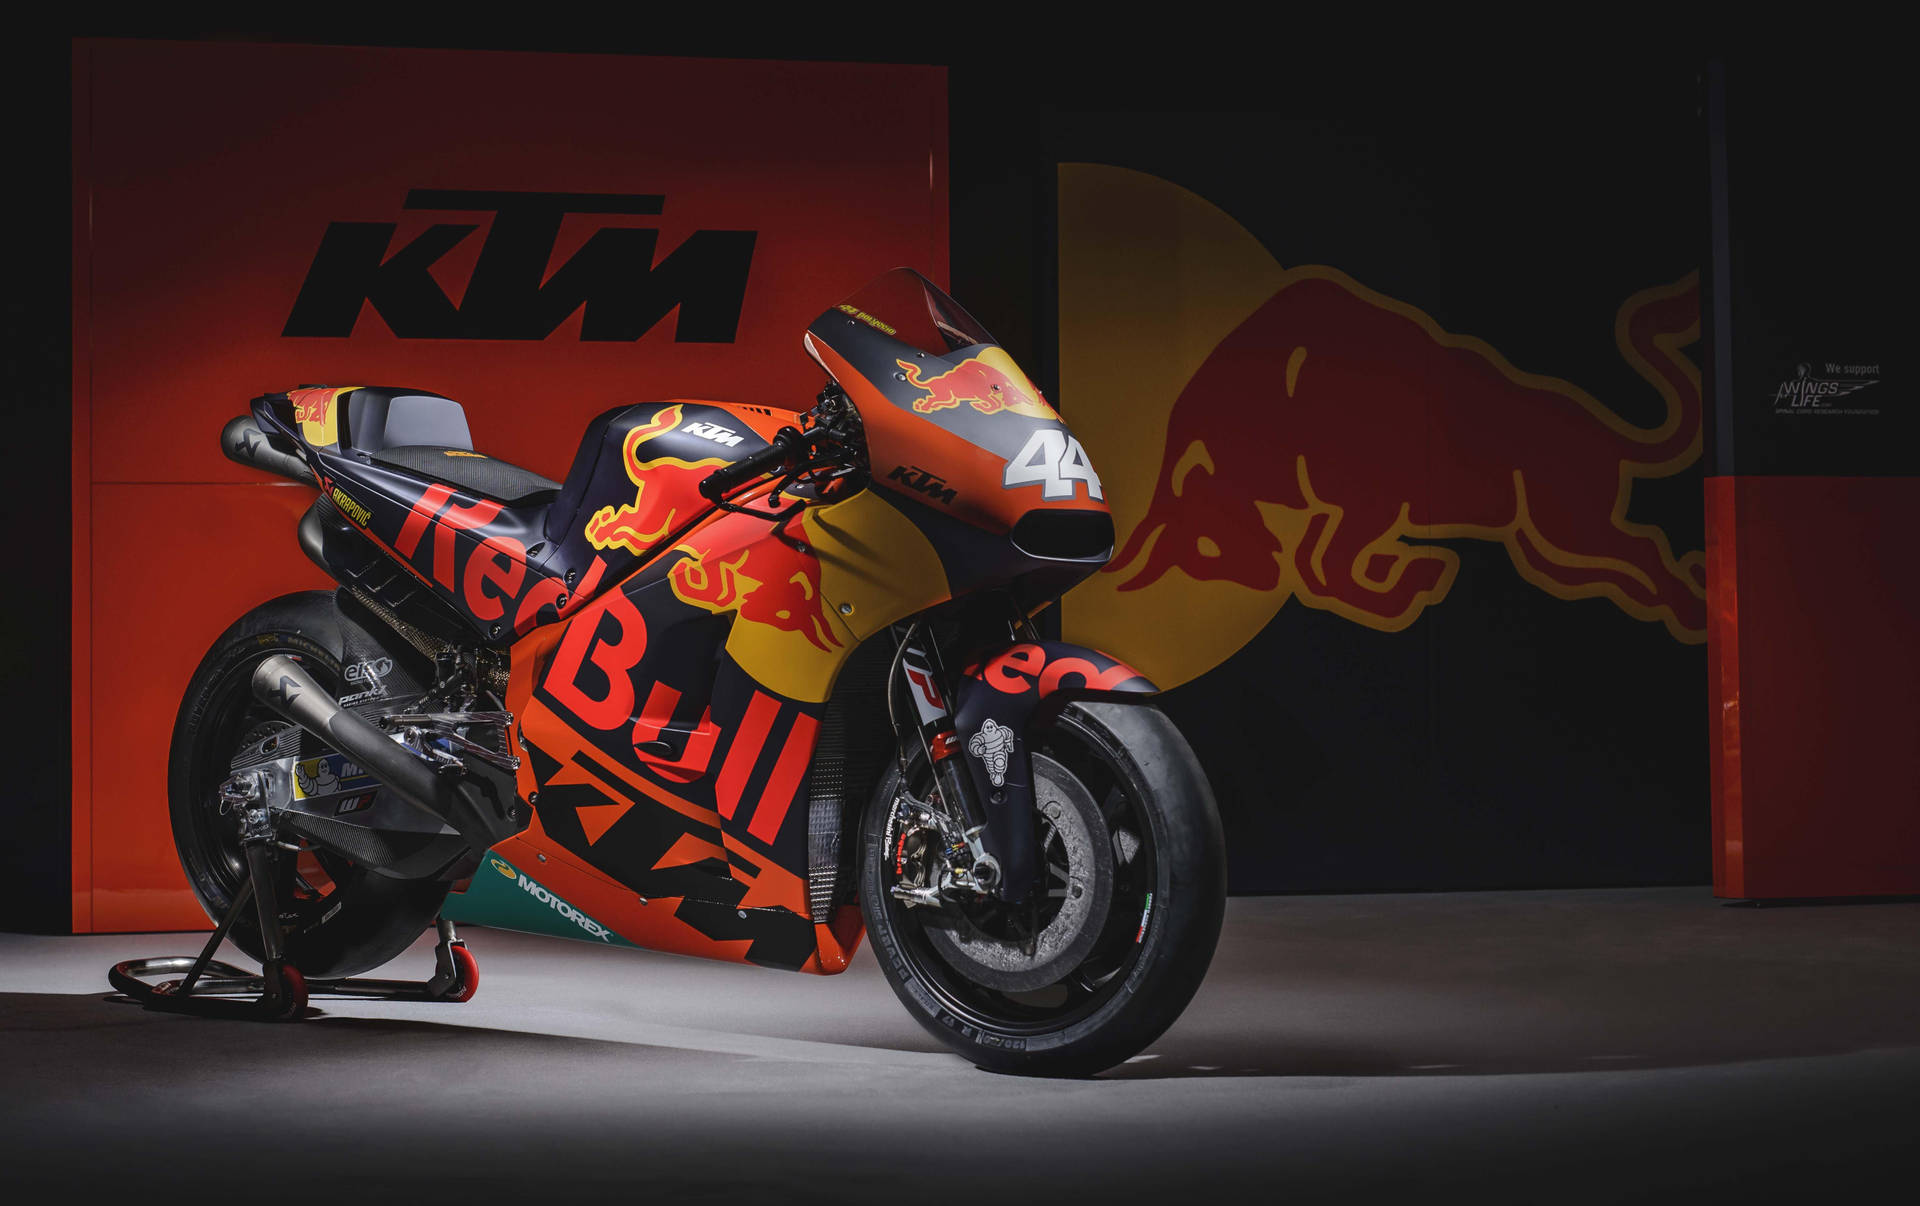 Caption: Ktm 4k Motorcycle Adorned With Red Bull Accents Wallpaper